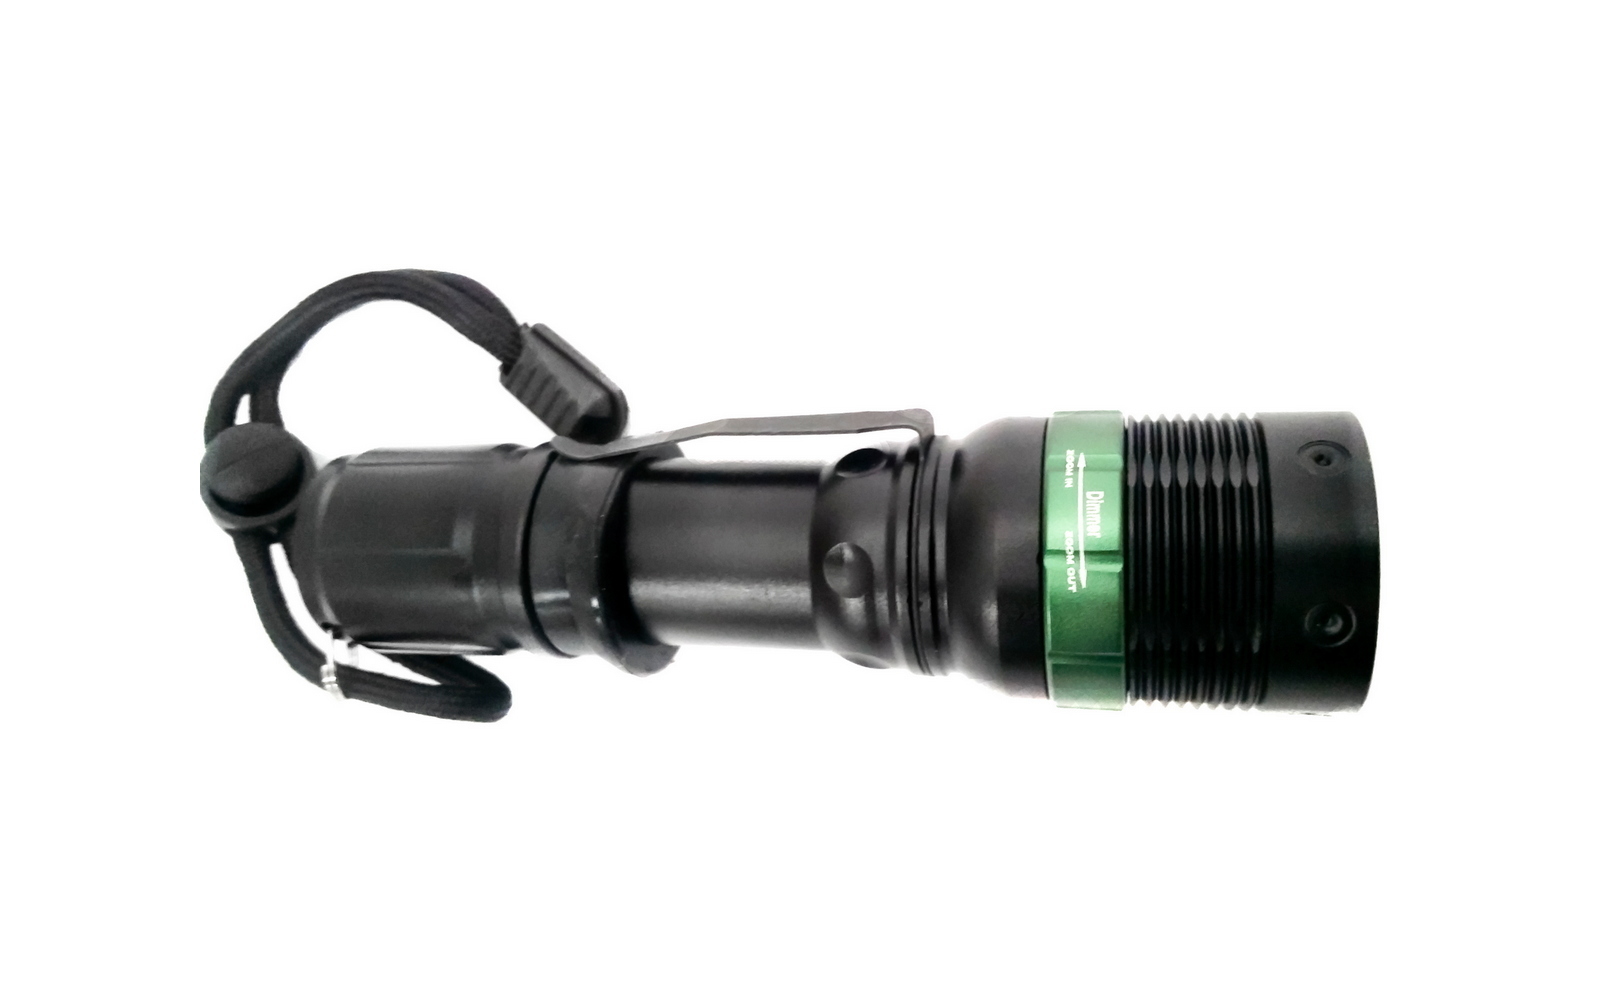 ACATANA Super bright LED Flashlight Torch - CREE XPE, 200-300 lumens 3x Operating Modes, 1x 4.2V 1865mAH Battery. AC Charger Included